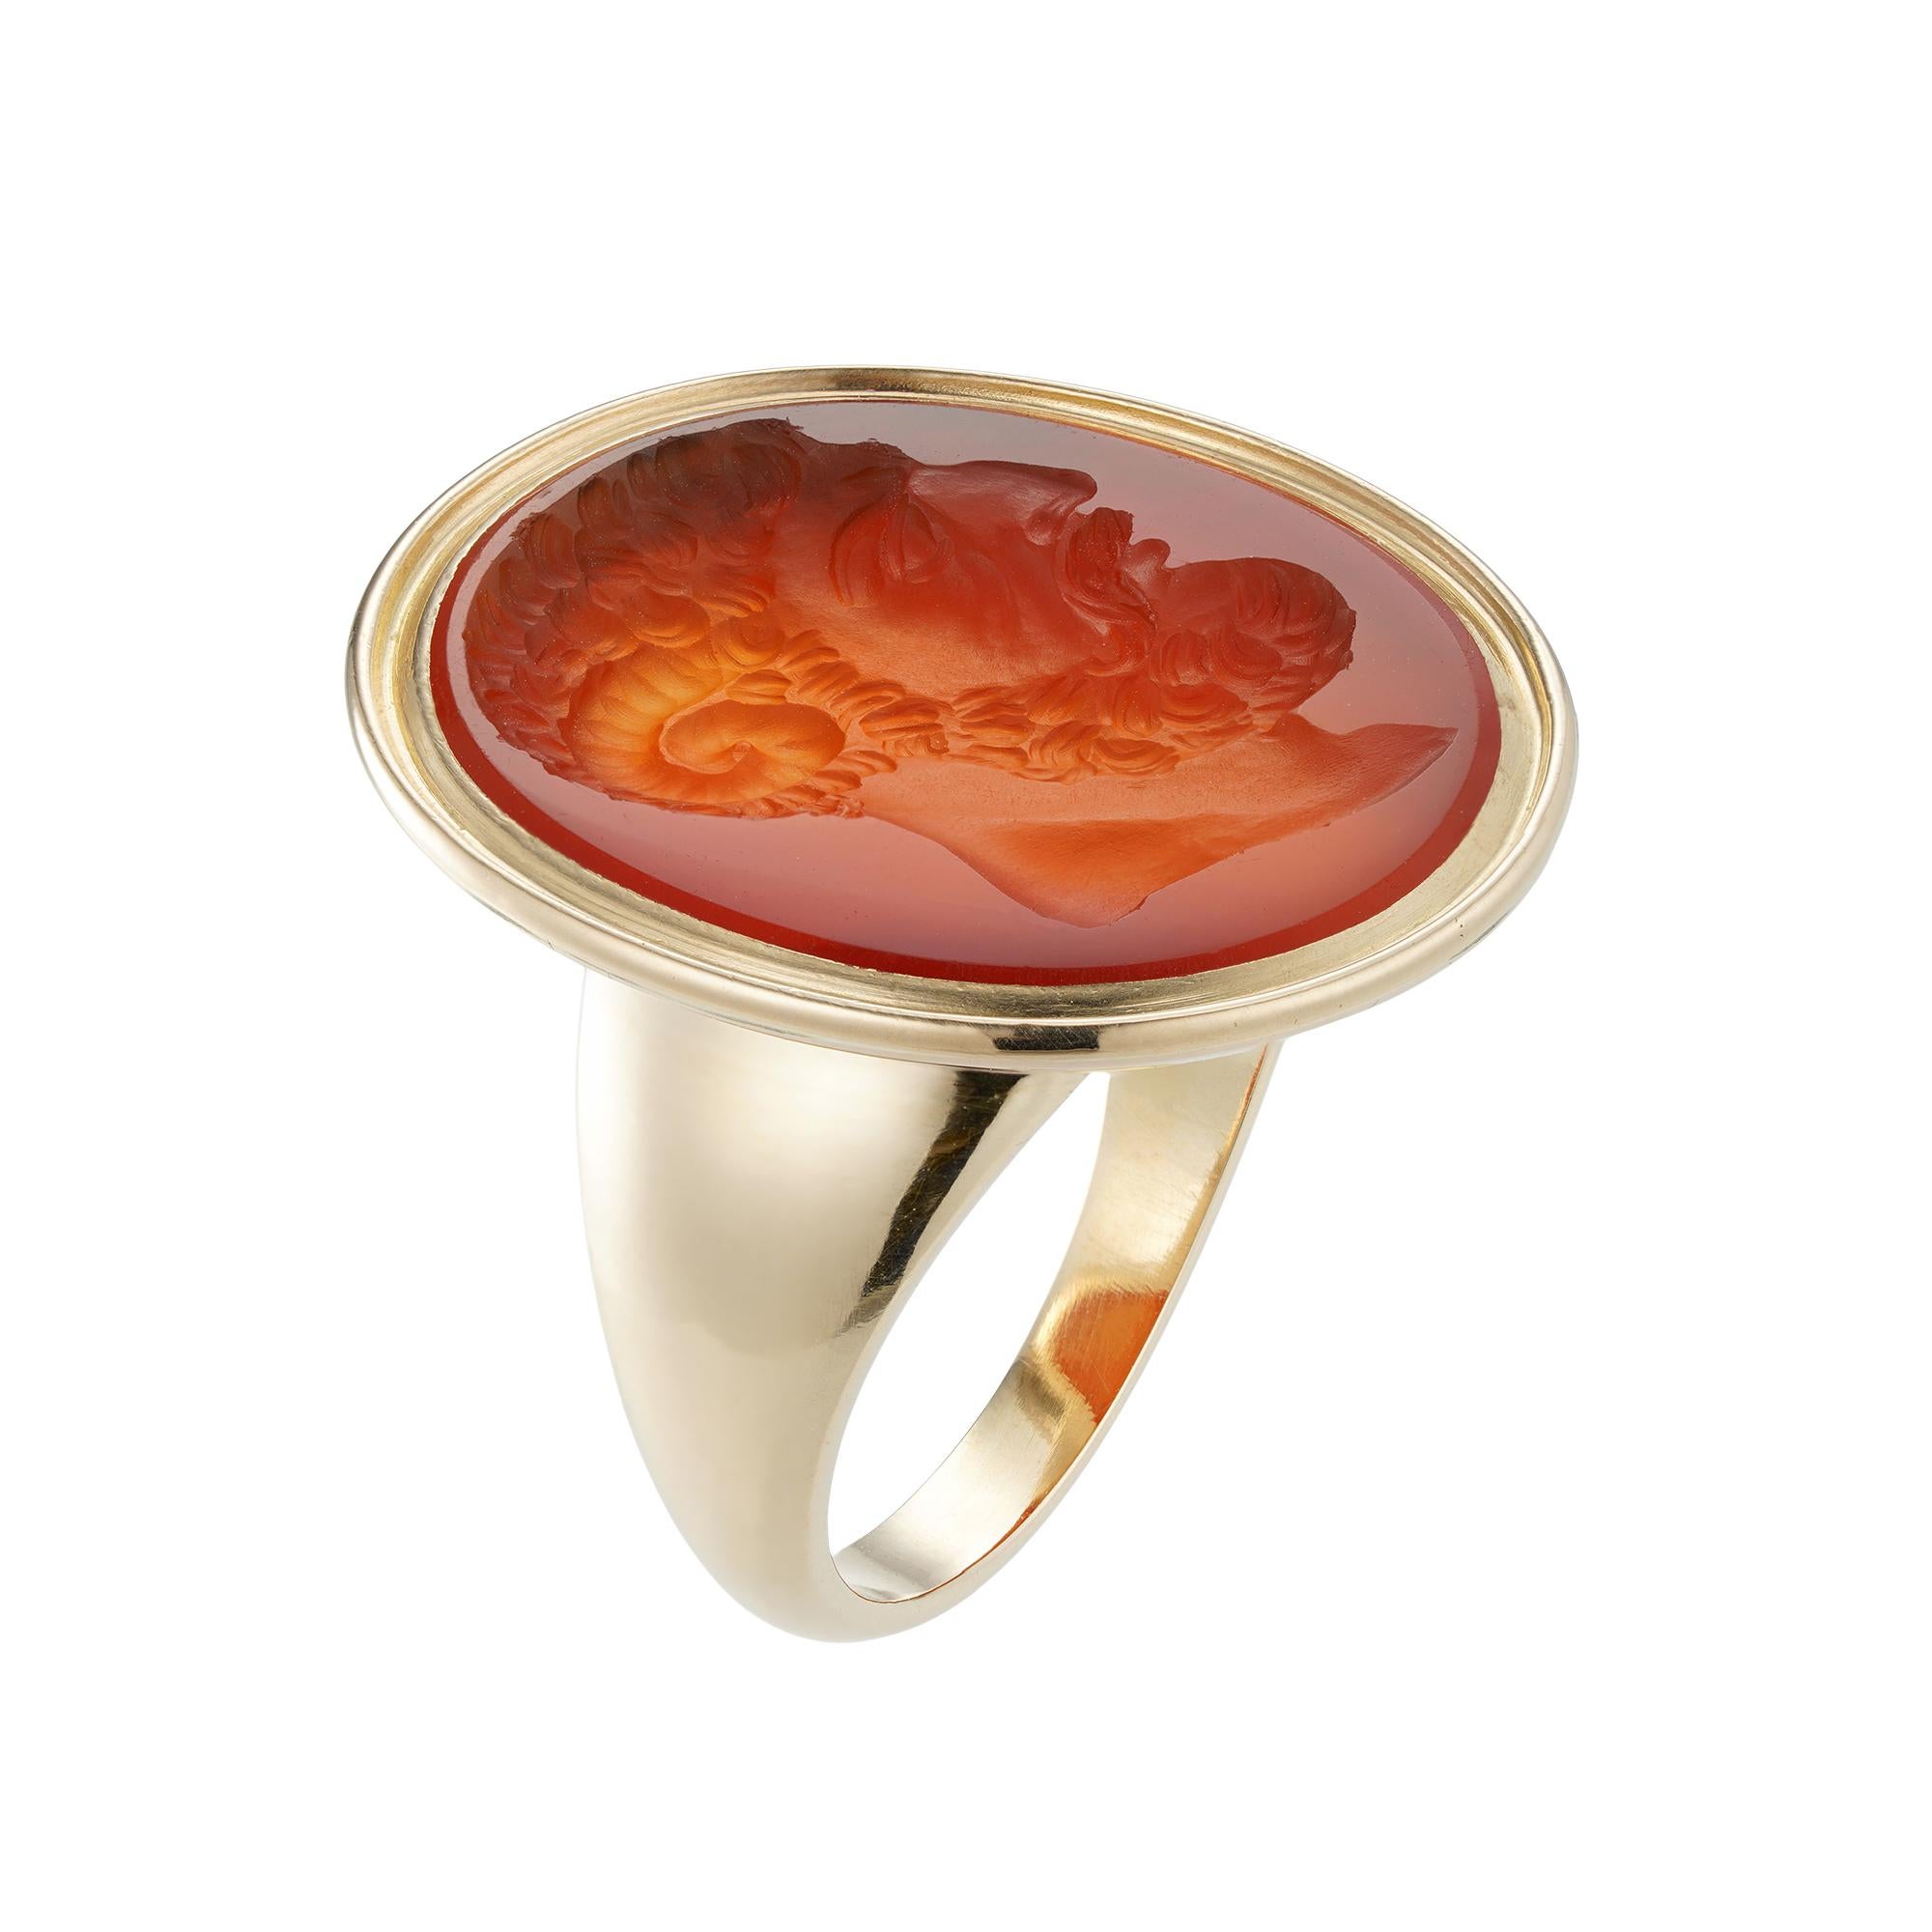 A Georgian carnelian intaglio ring, the oval carnelian measuring 20 x 17mm, seal engraved with the head of Zeus Ammon, depicted in profile with ram’s horn, set in yellow gold mount with an open back and tapering gold shoulders, unmarked, tested as